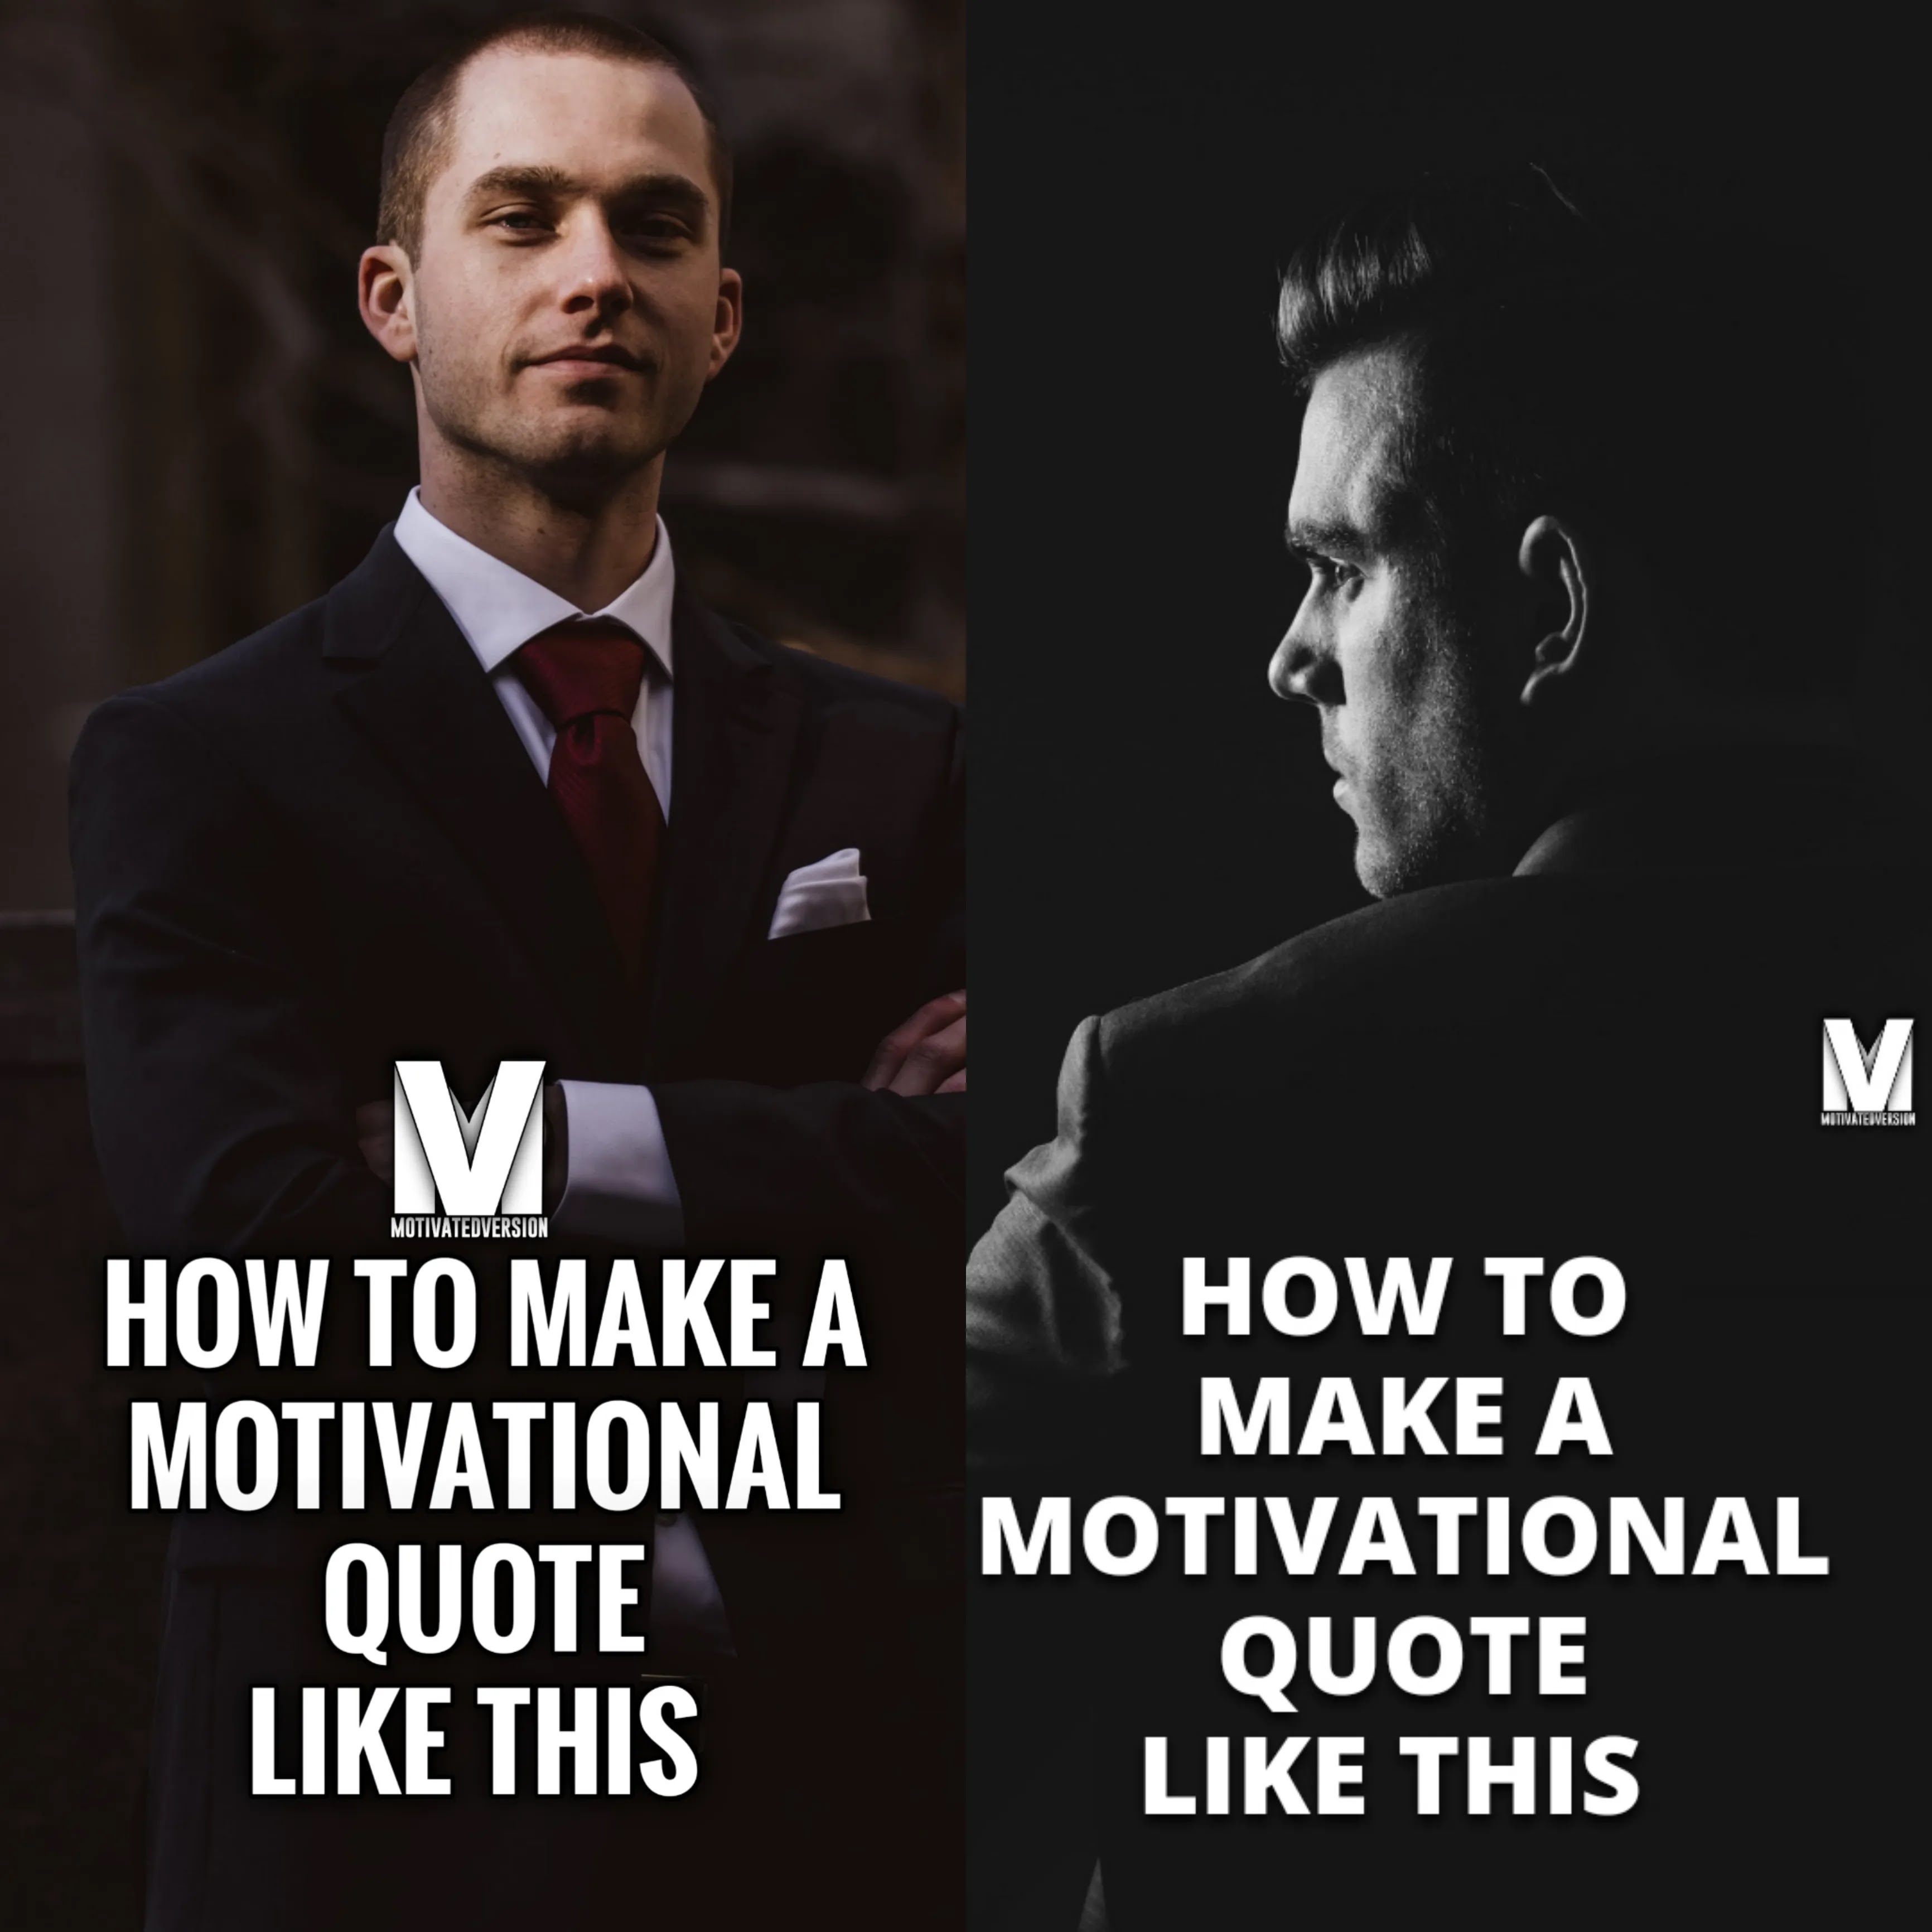 How to make motivational quotes